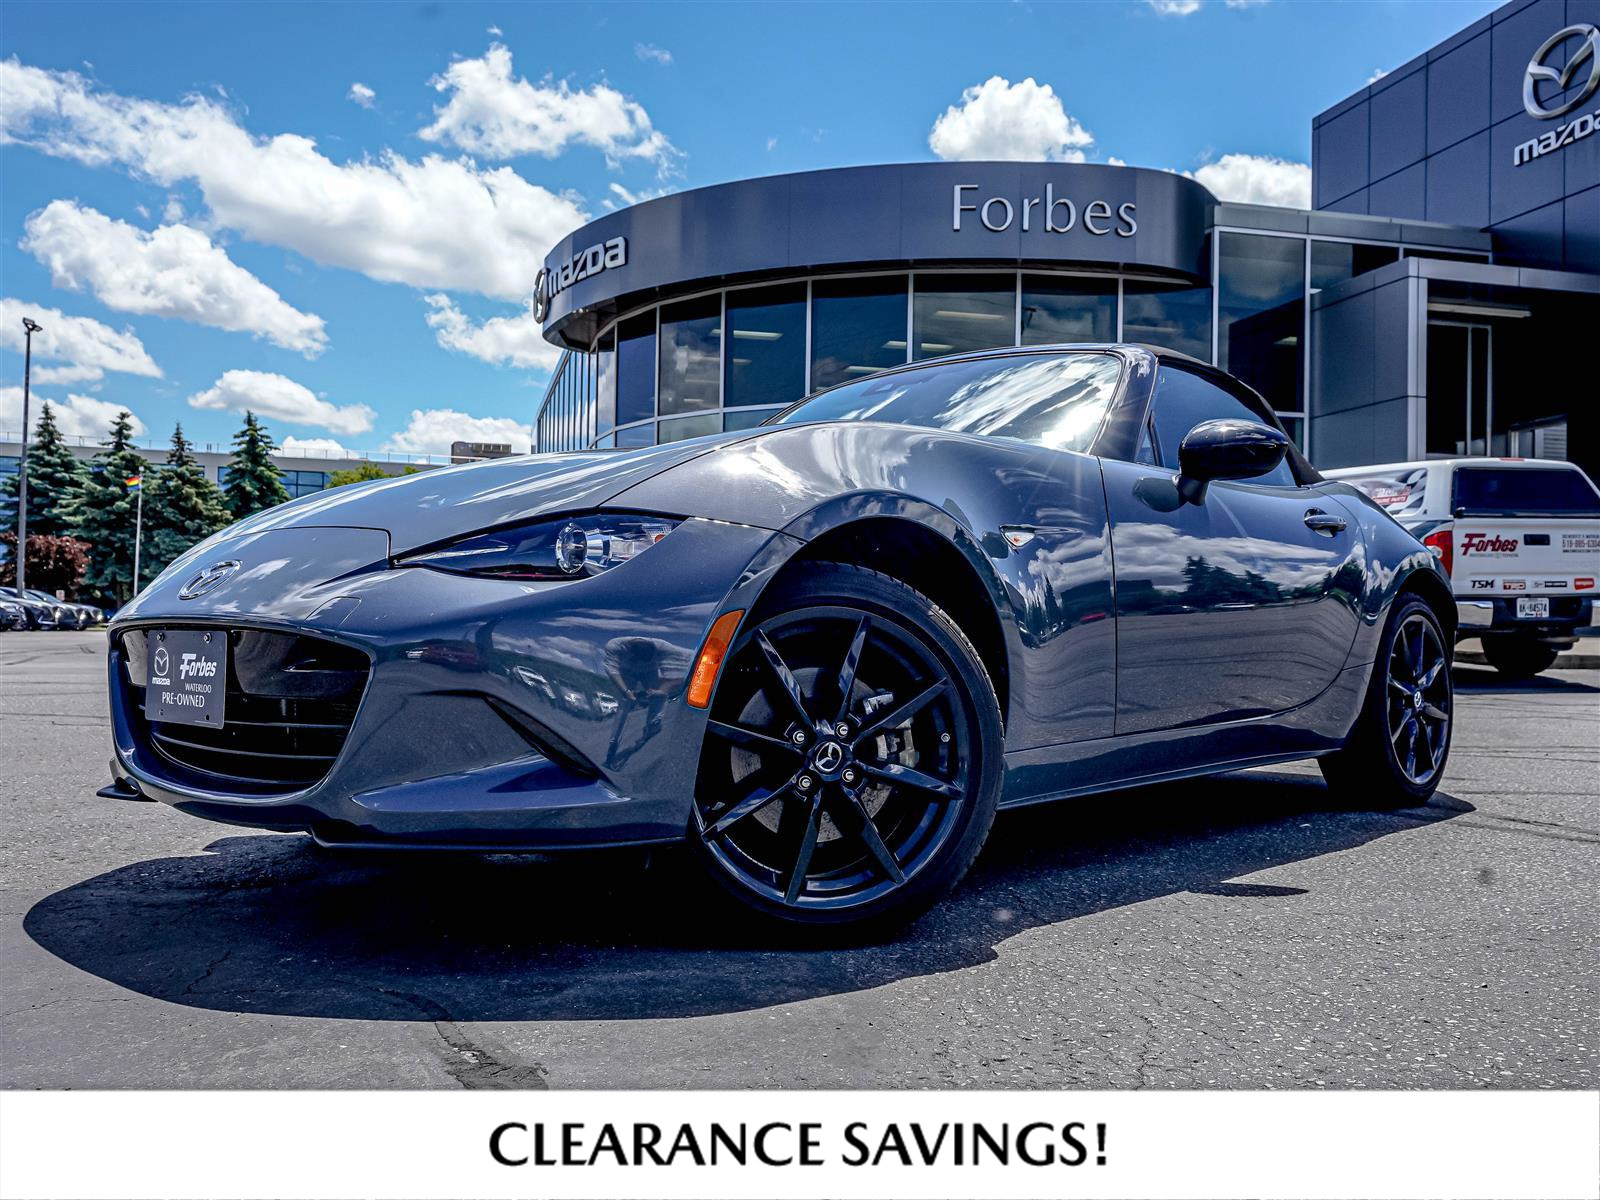 2020 Mazda MX-5 GS-P - ONE OWNER - CLEAN CARFAX!!!